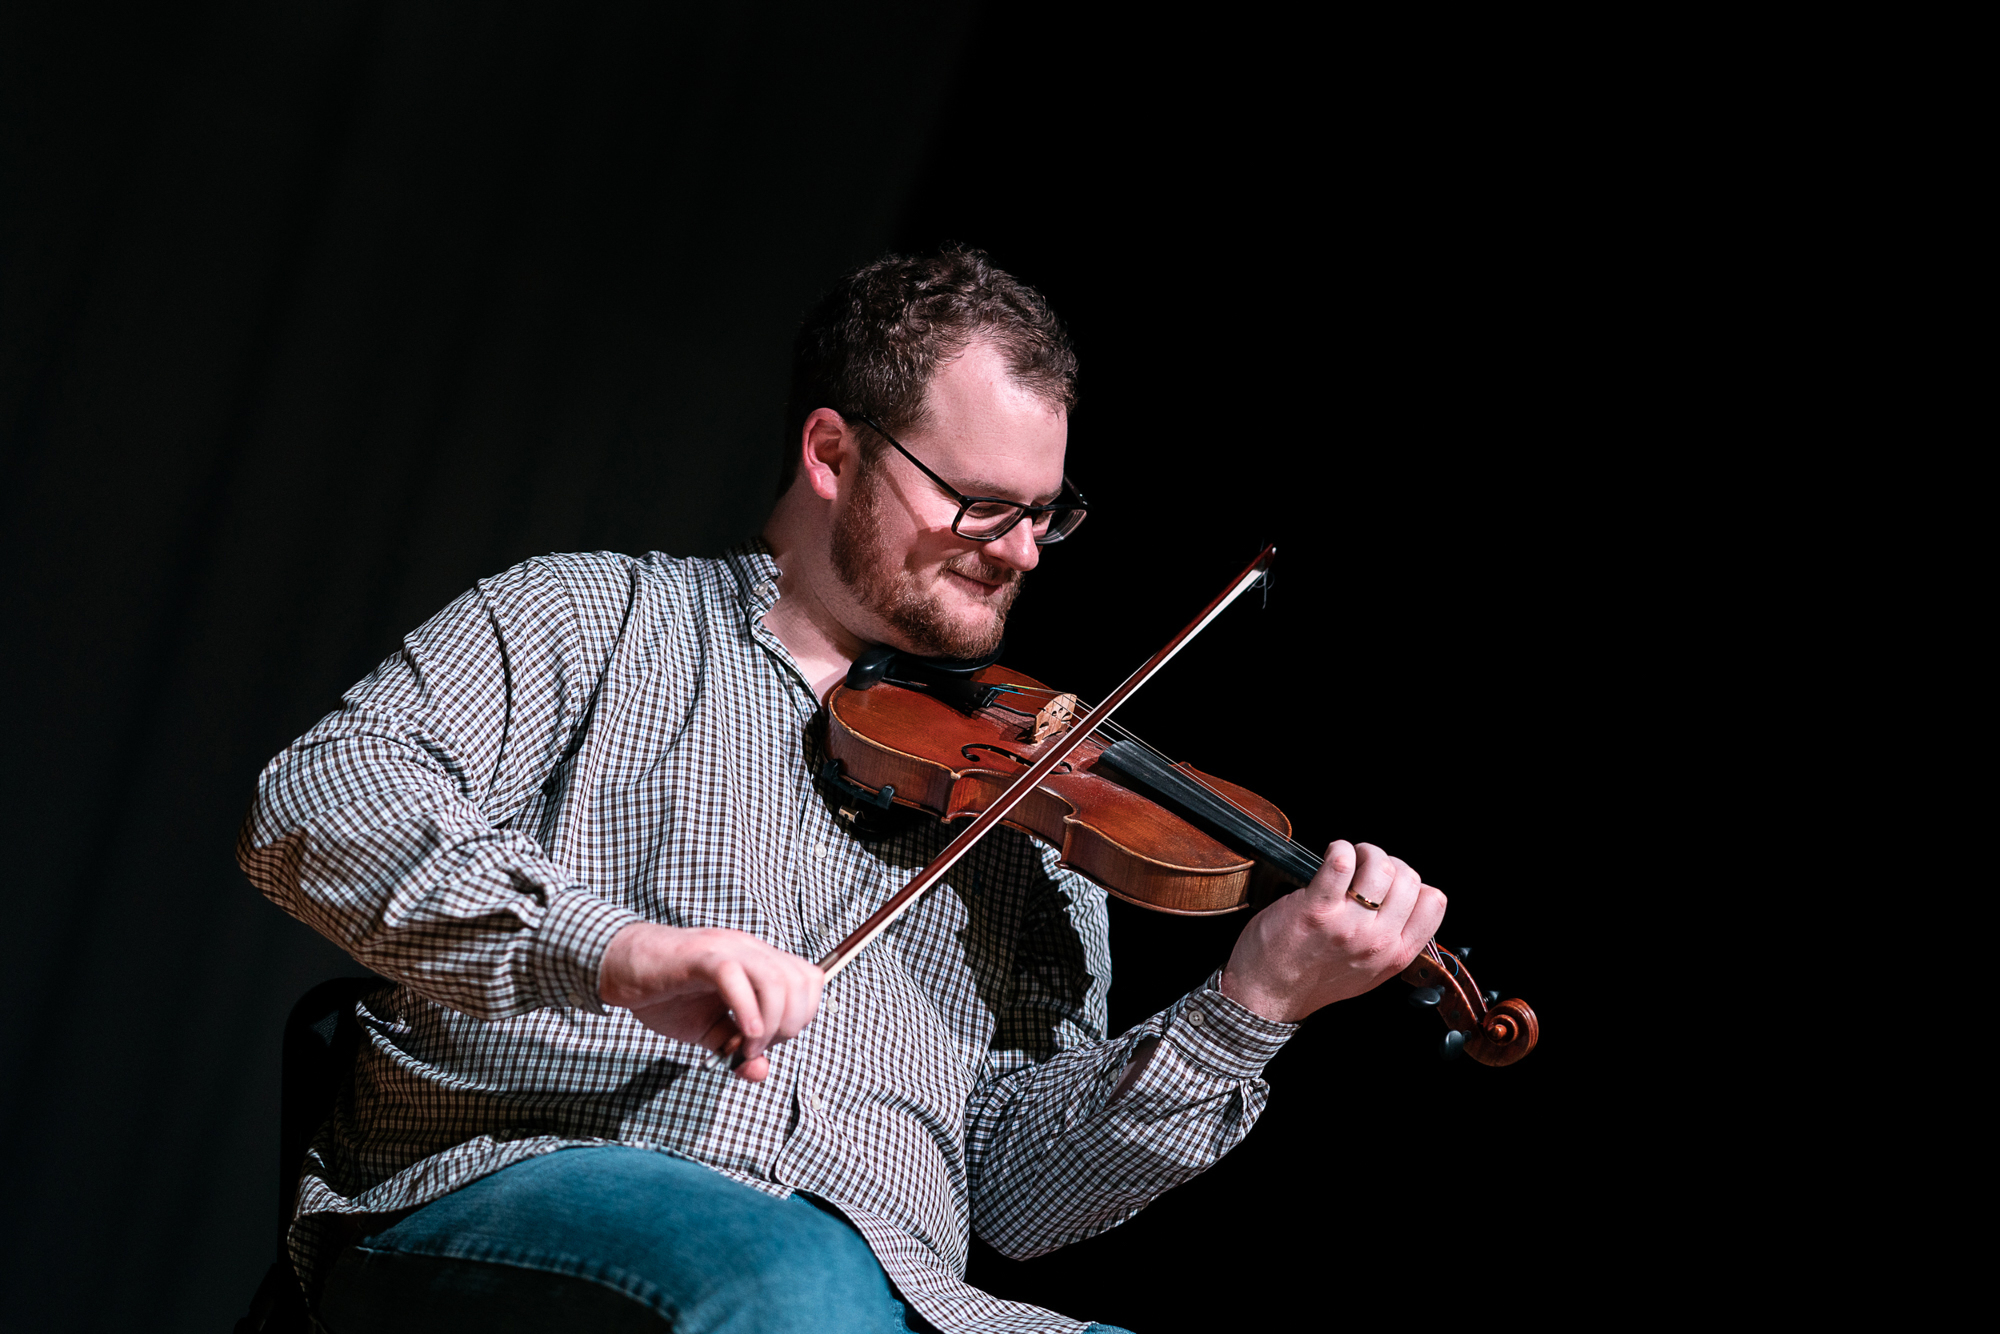 Dylan Foley, raised in upstate New York, has become a four-time All-Ireland fiddle champion. (Courtesy photo)